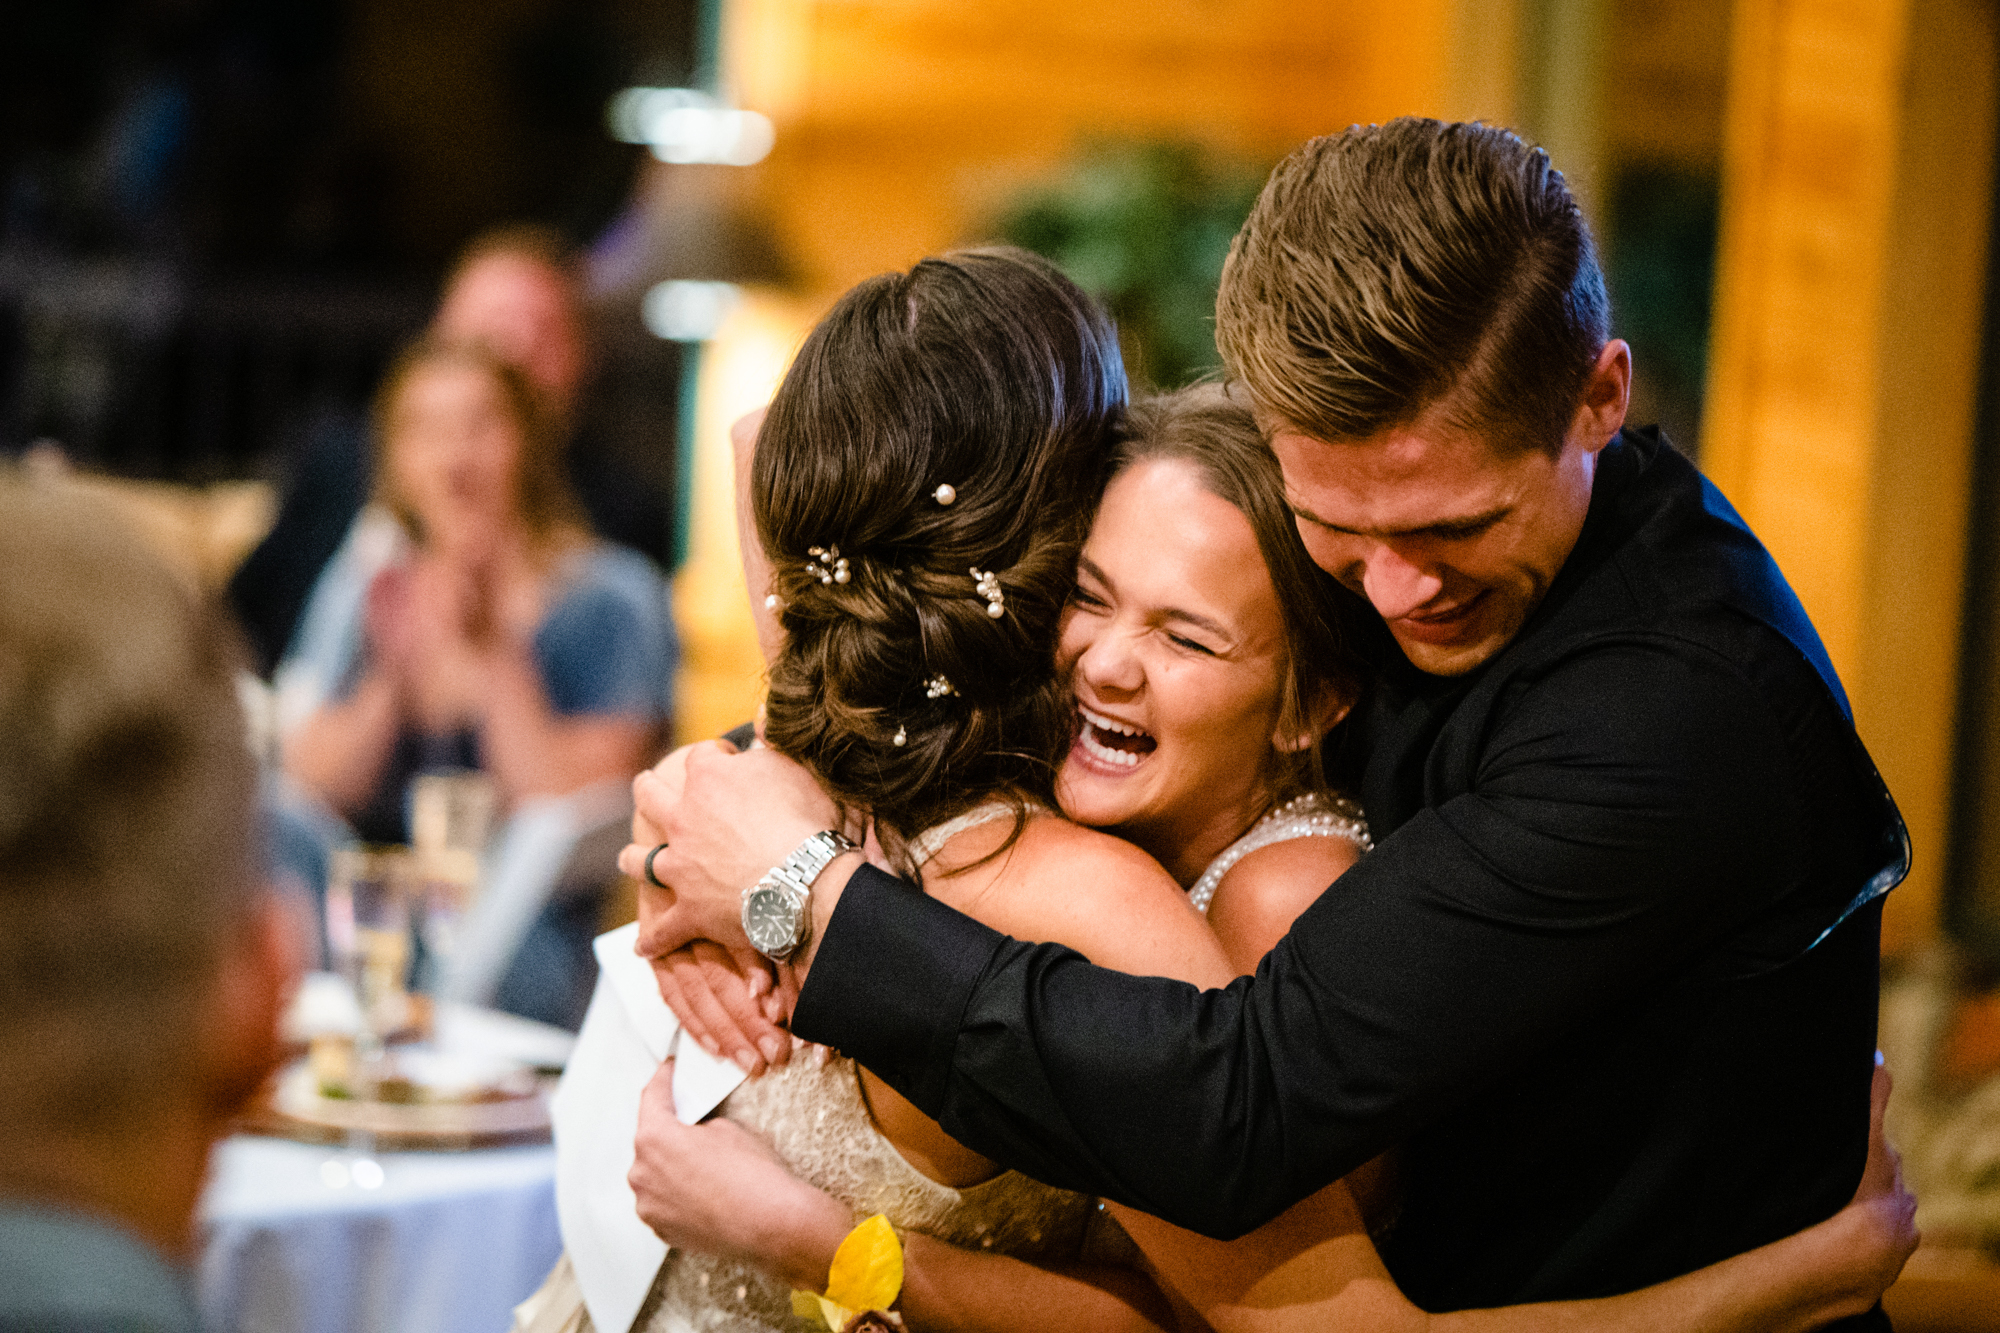 Fletcher and Veronica's friends hug them after their toasts